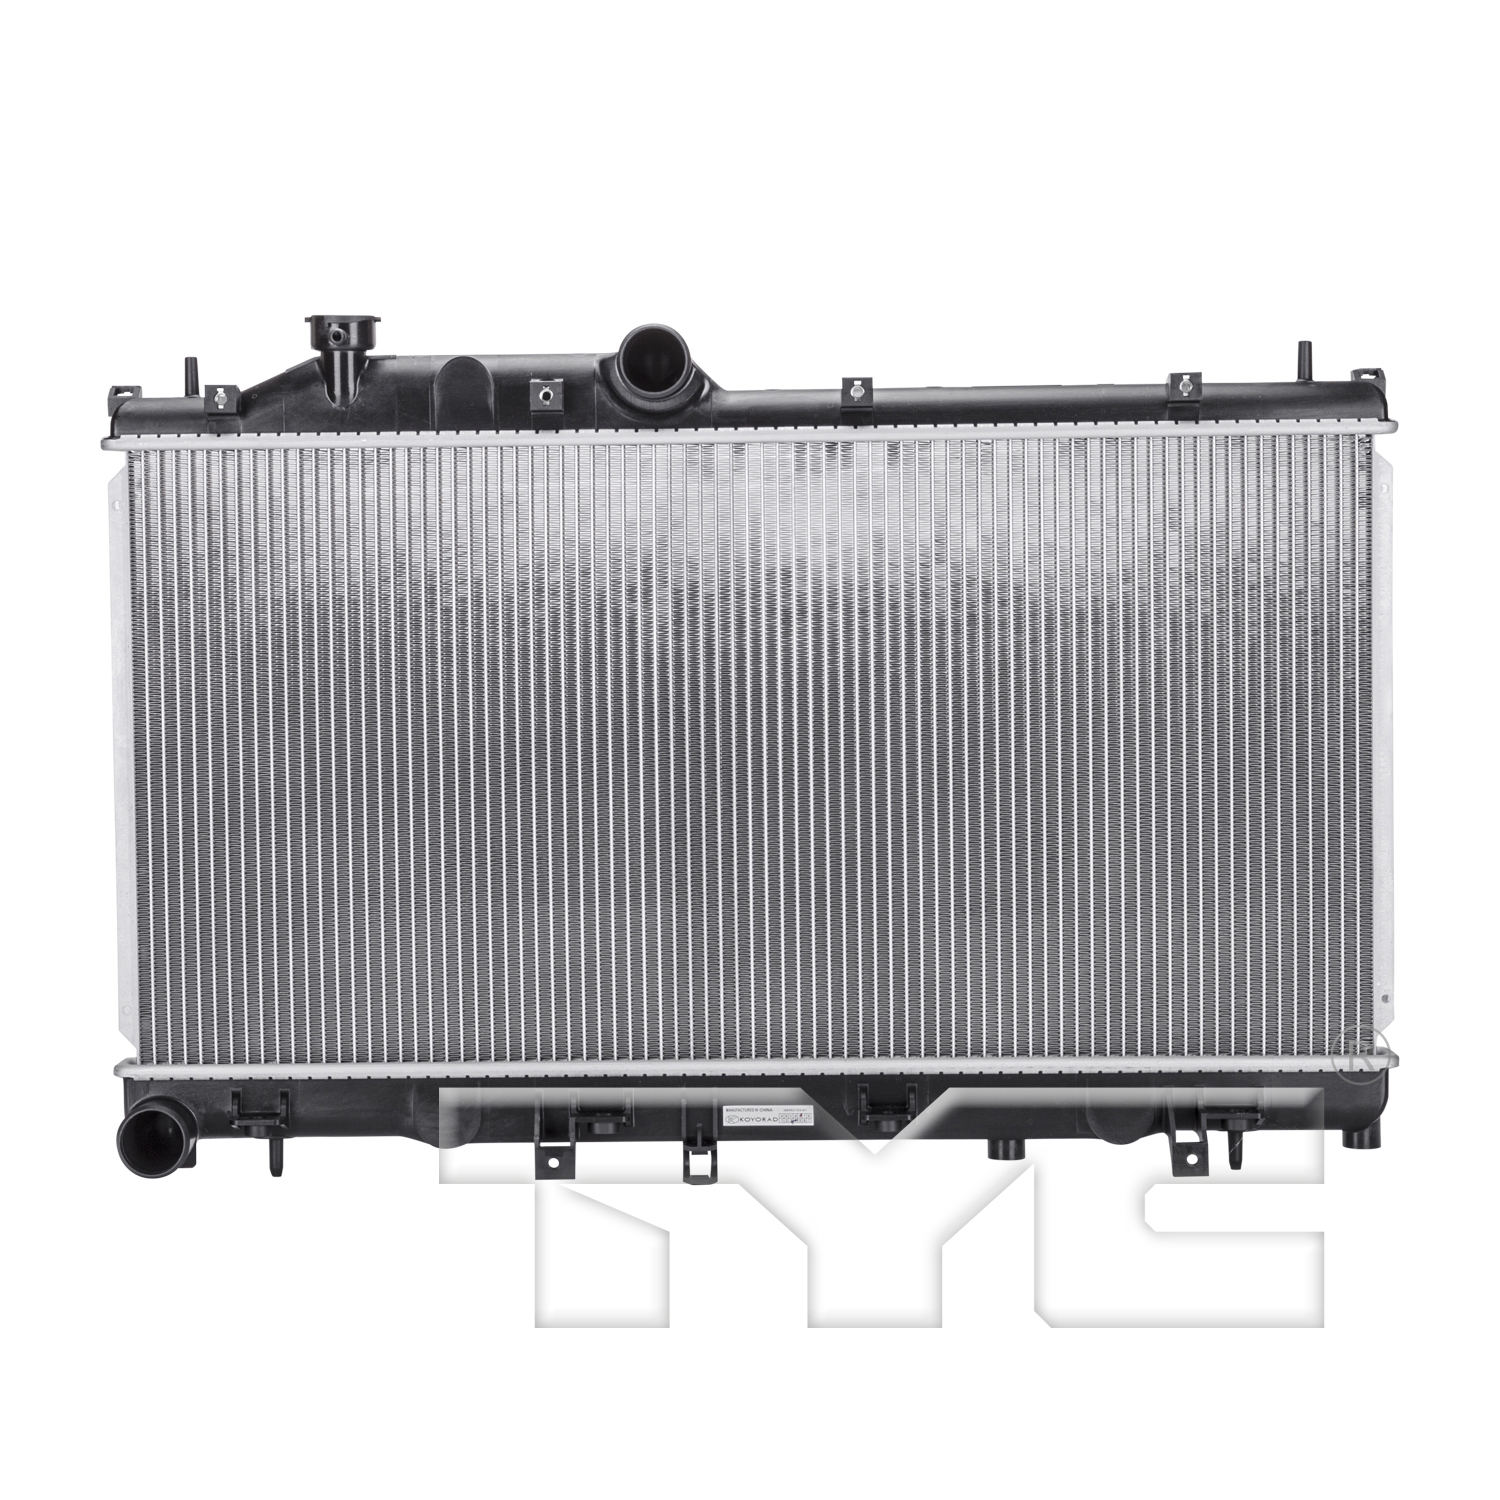 Aftermarket RADIATORS for SUBARU - FORESTER, FORESTER,14-18,Radiator assembly